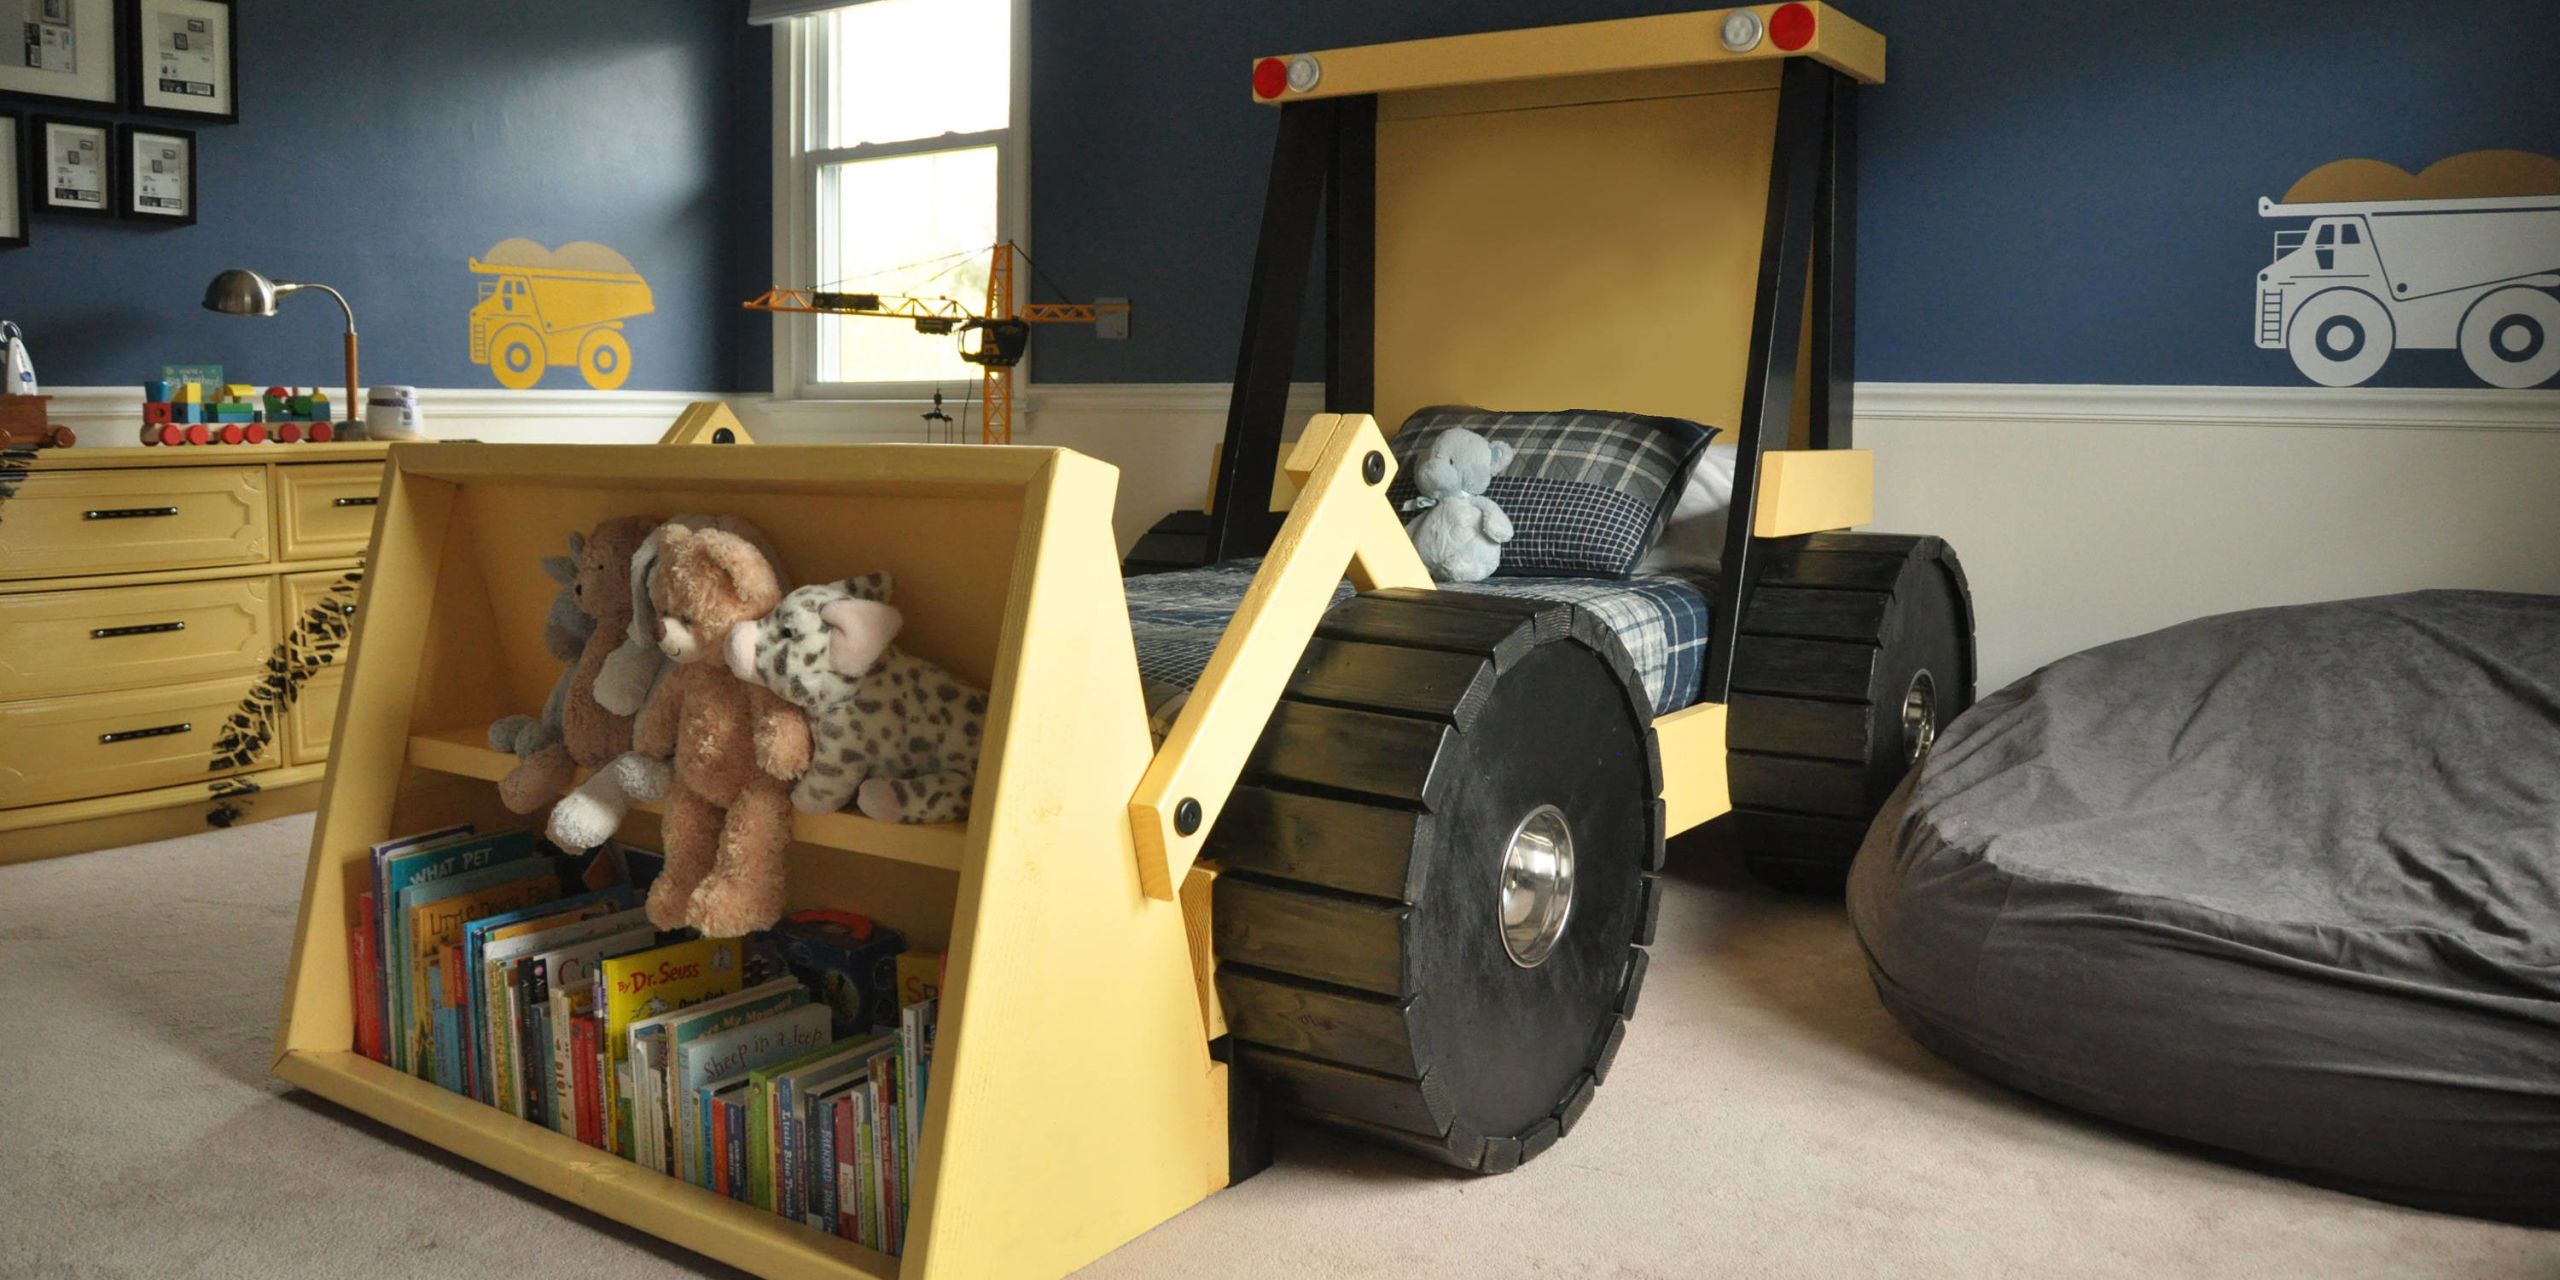 cool childrens beds